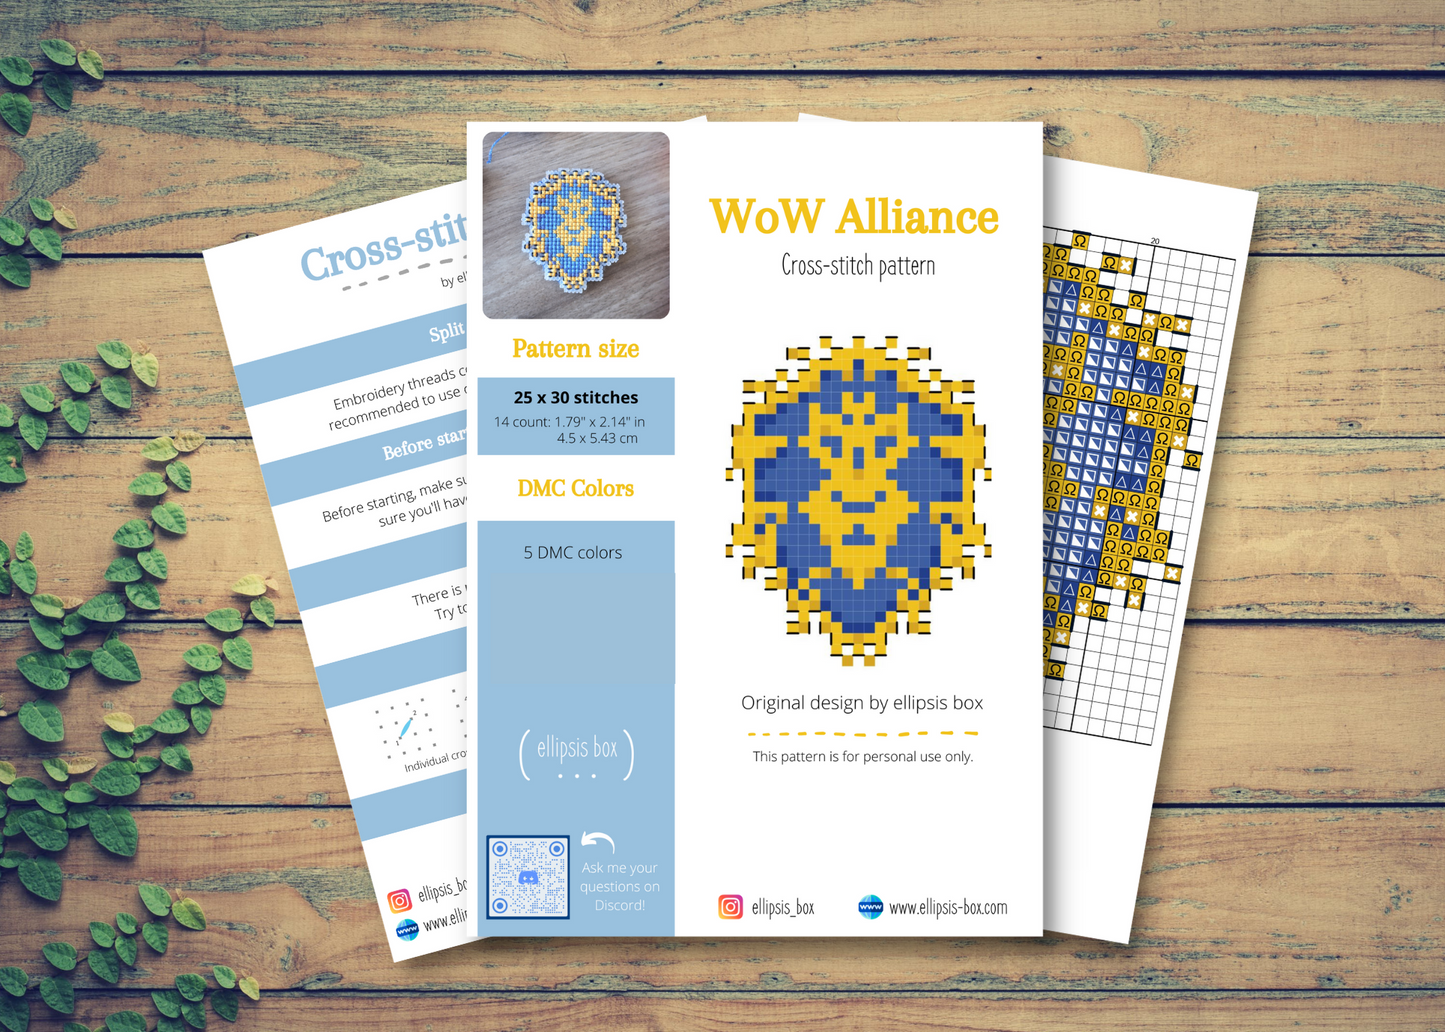 The Alliance from World of Warcraft - Cross stitch magnet kit